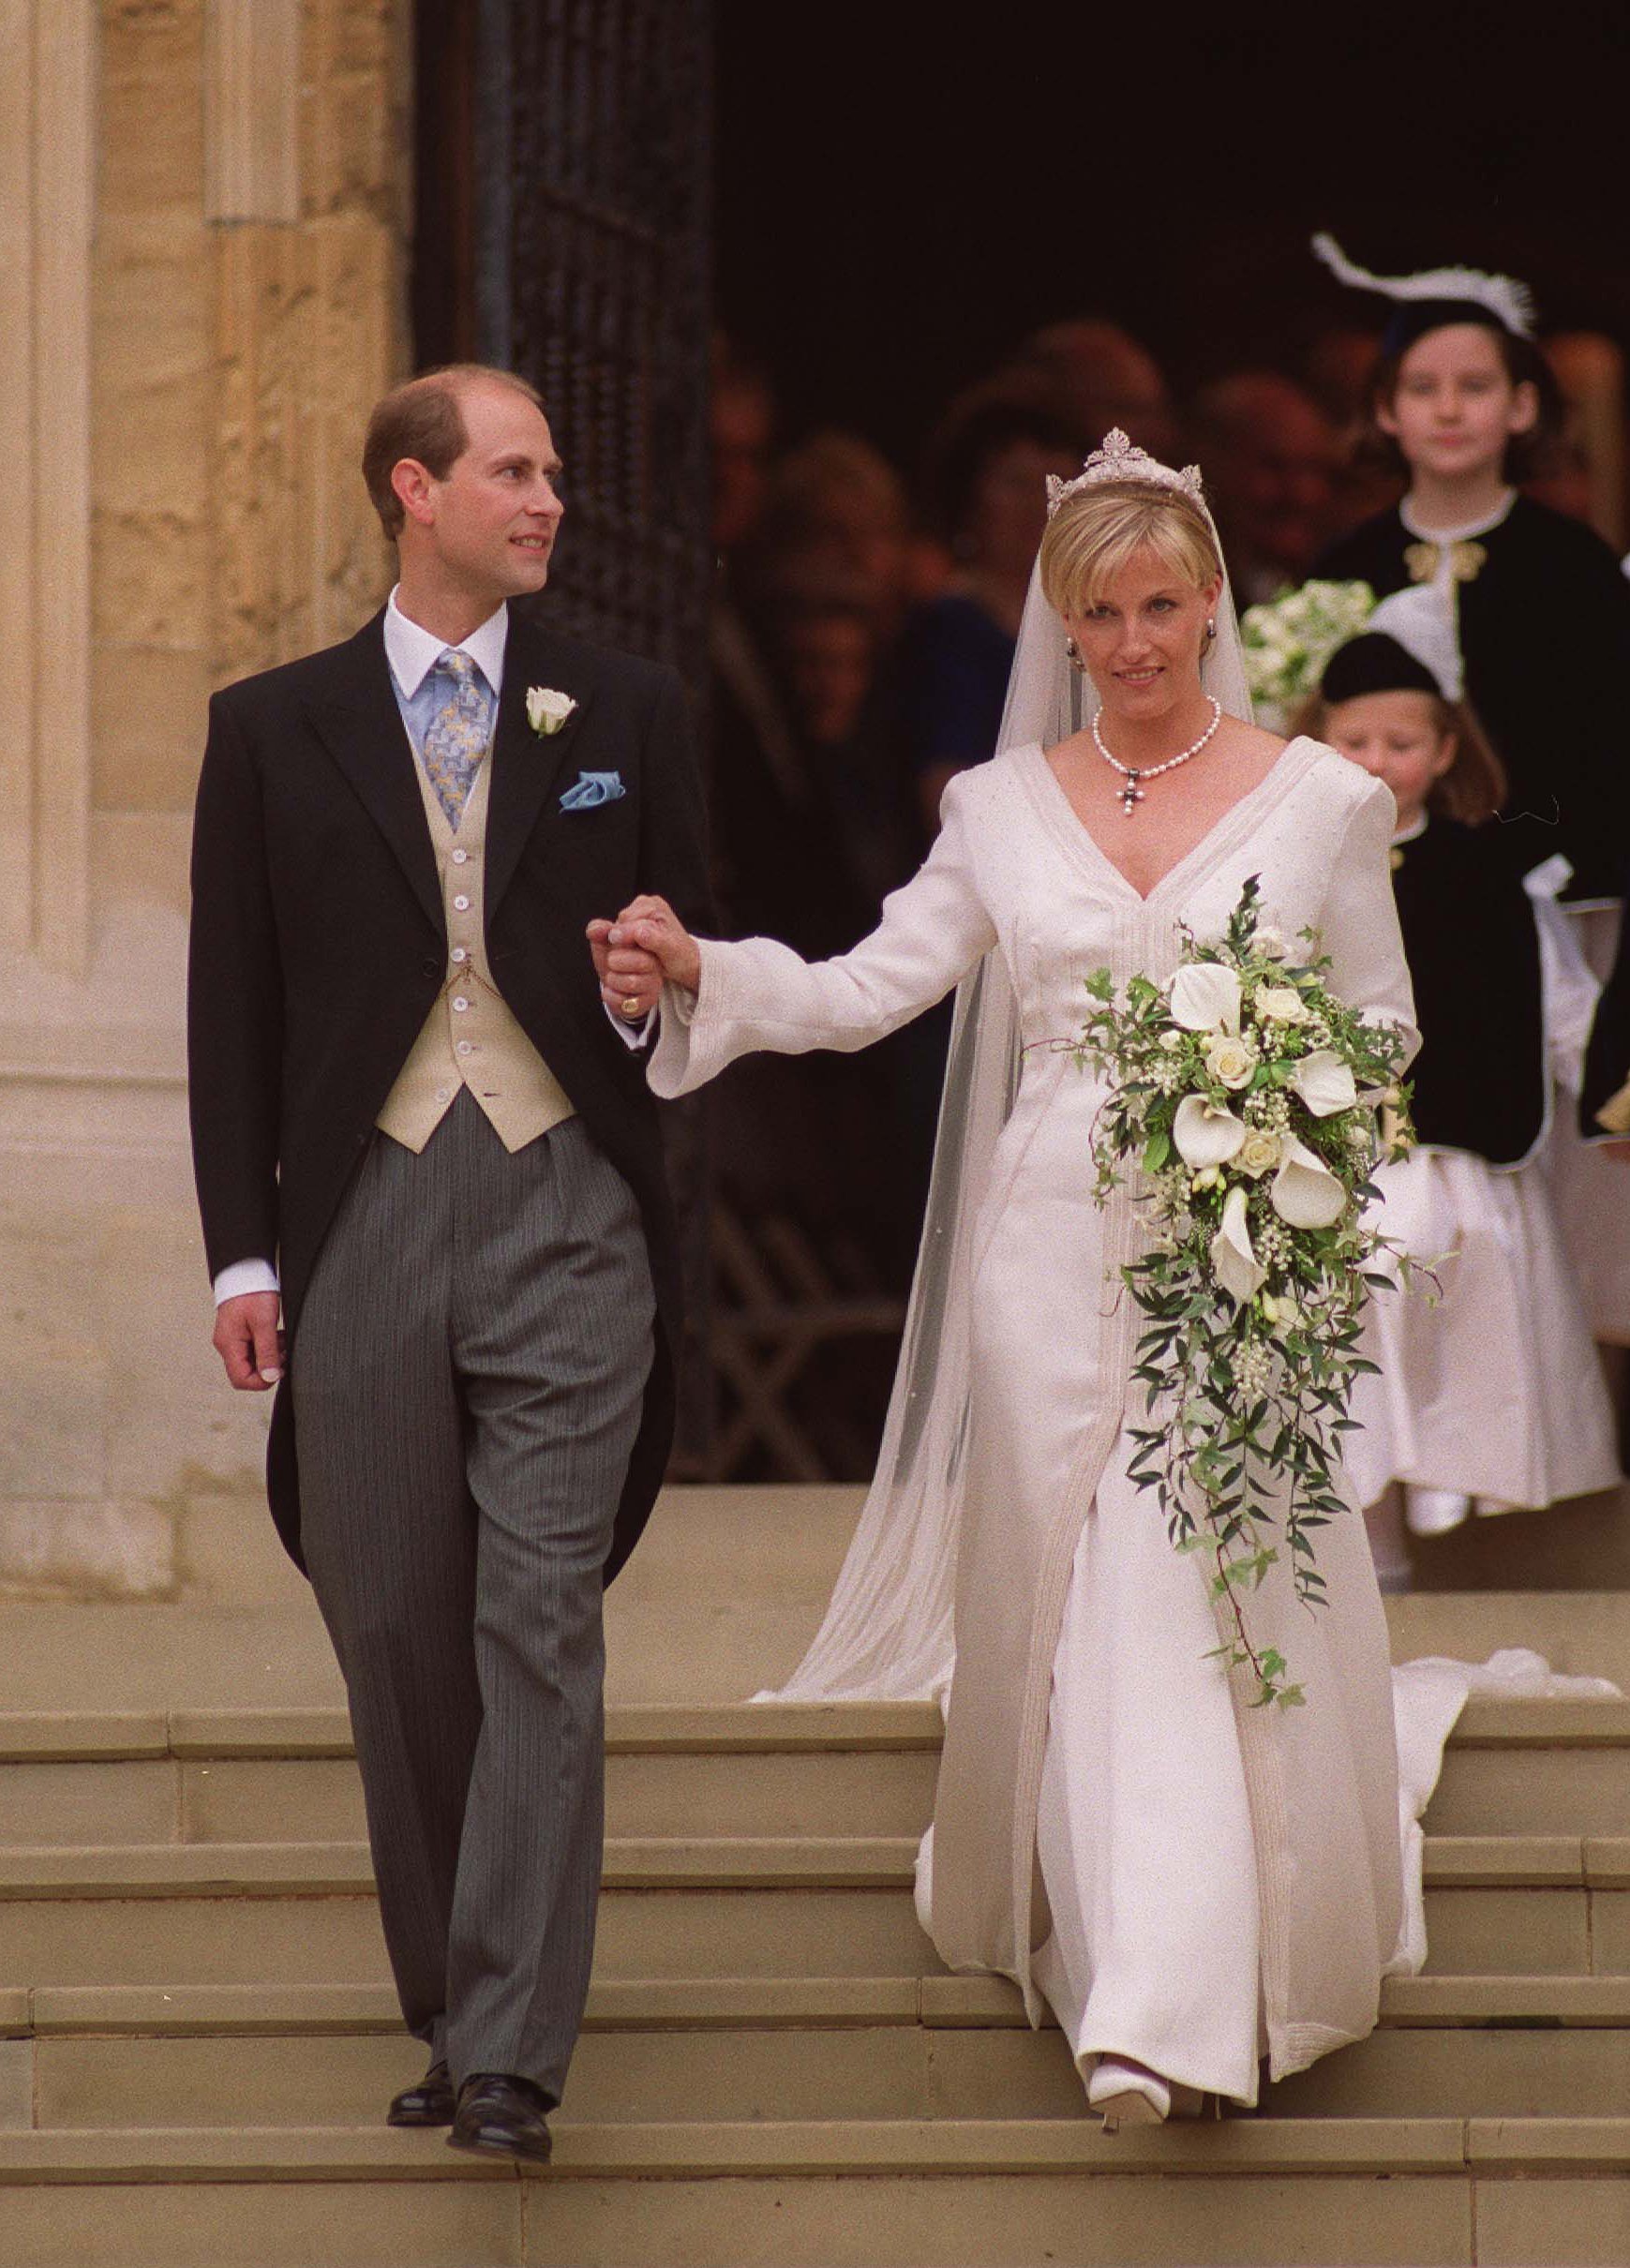 Prince Edward and Sophie Wessex in London on their wedding day in 1999. | Source: Getty Images